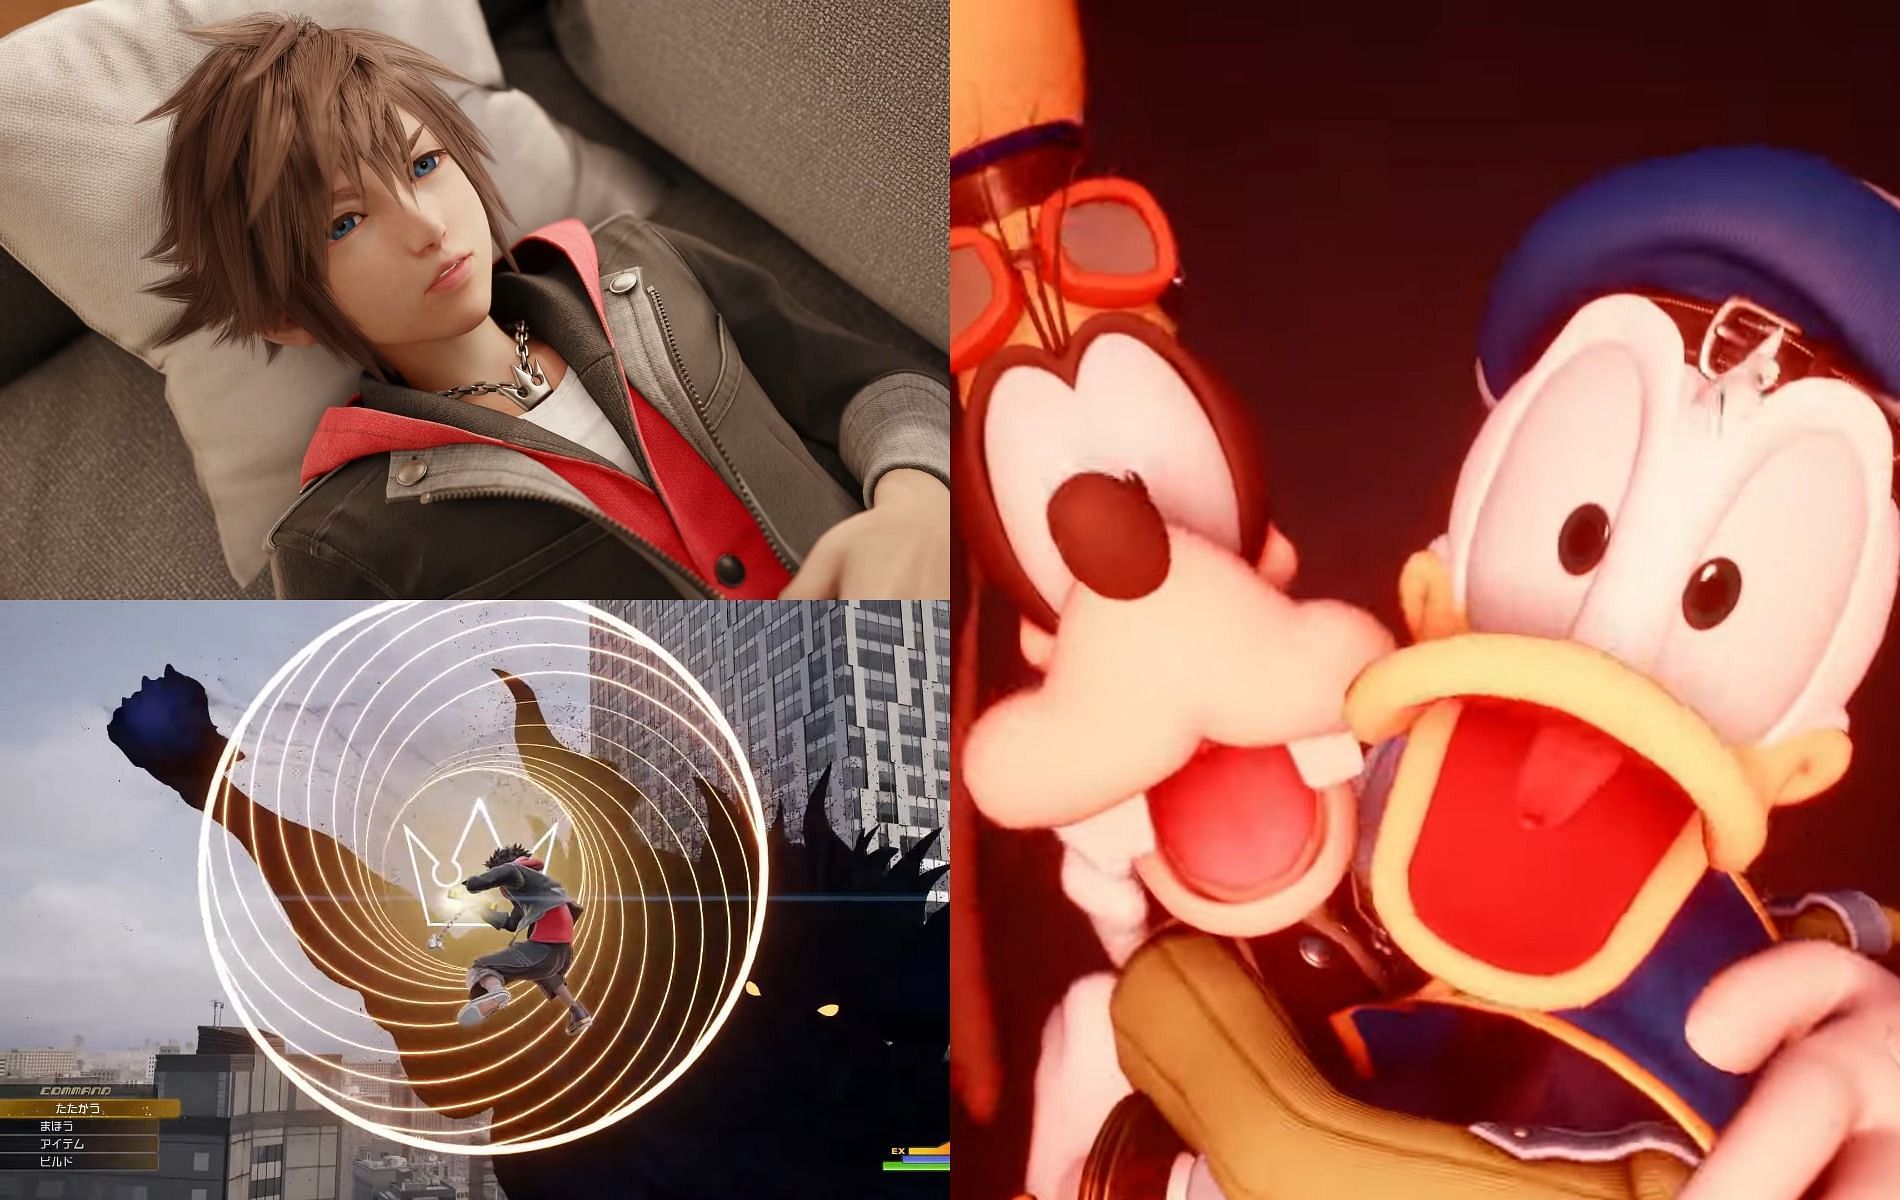 Kingdom Hearts 4: Official trailer reveal, possible release date, and more